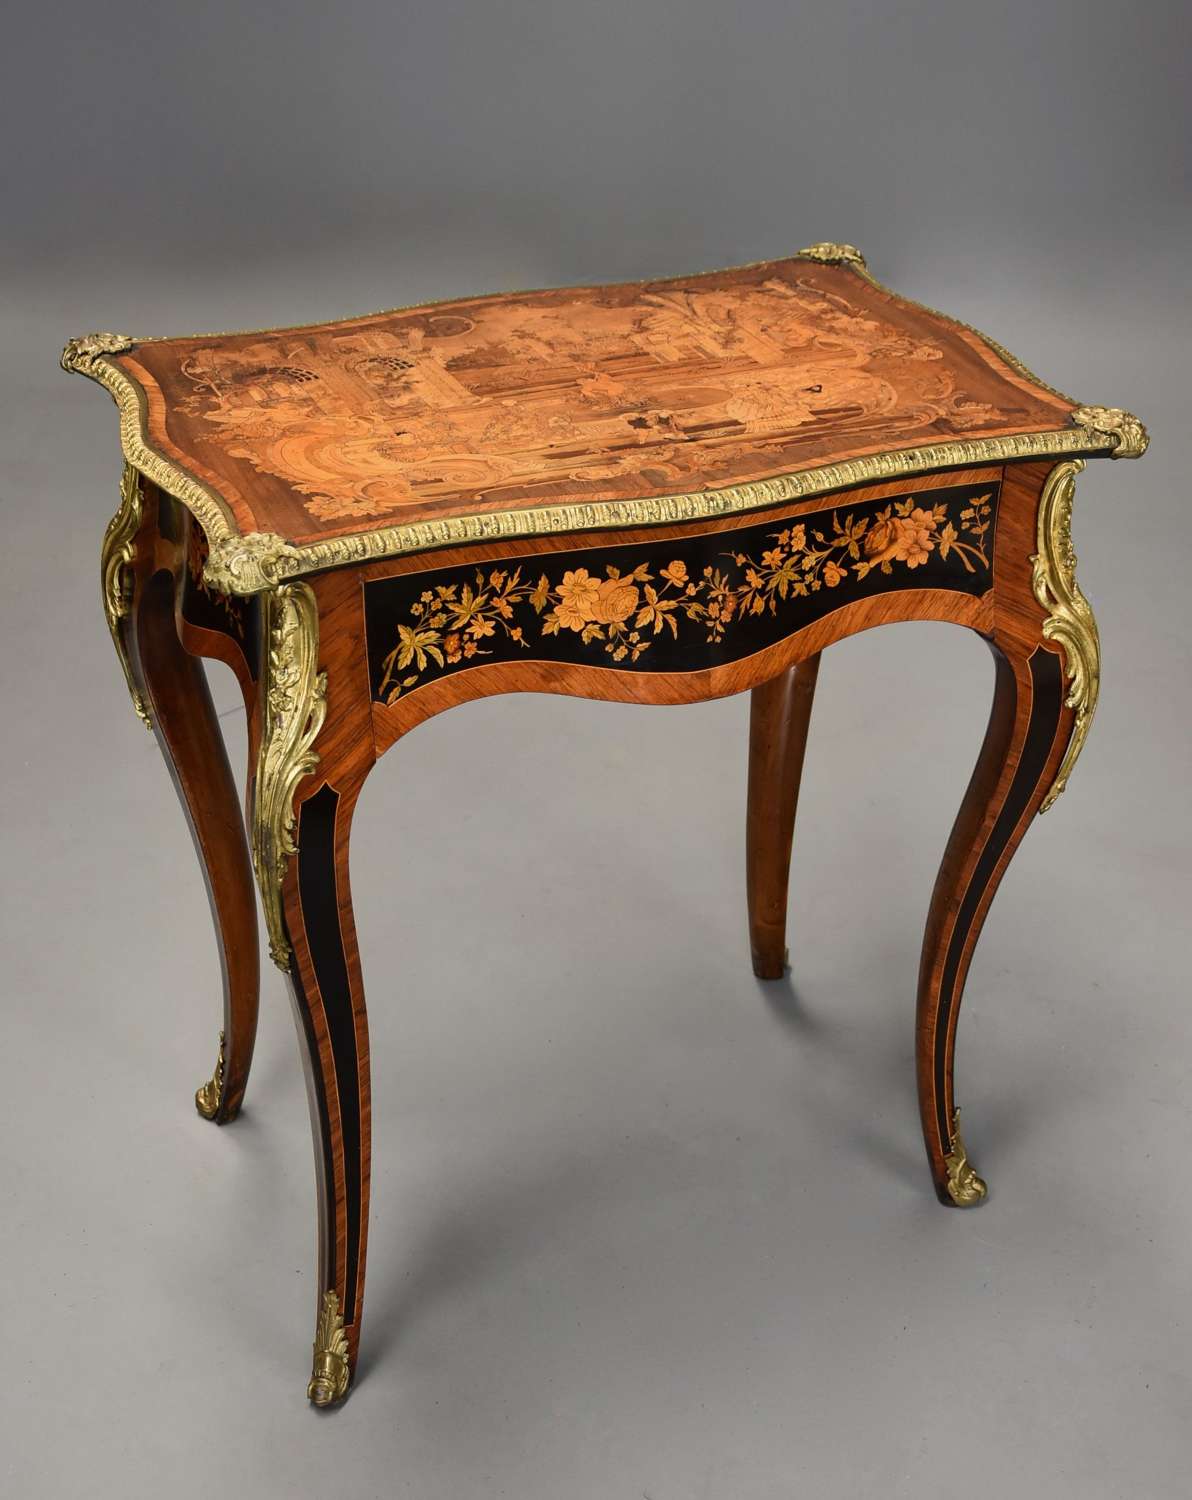 19thc fine quality Kingwood inlaid centre table in the French style